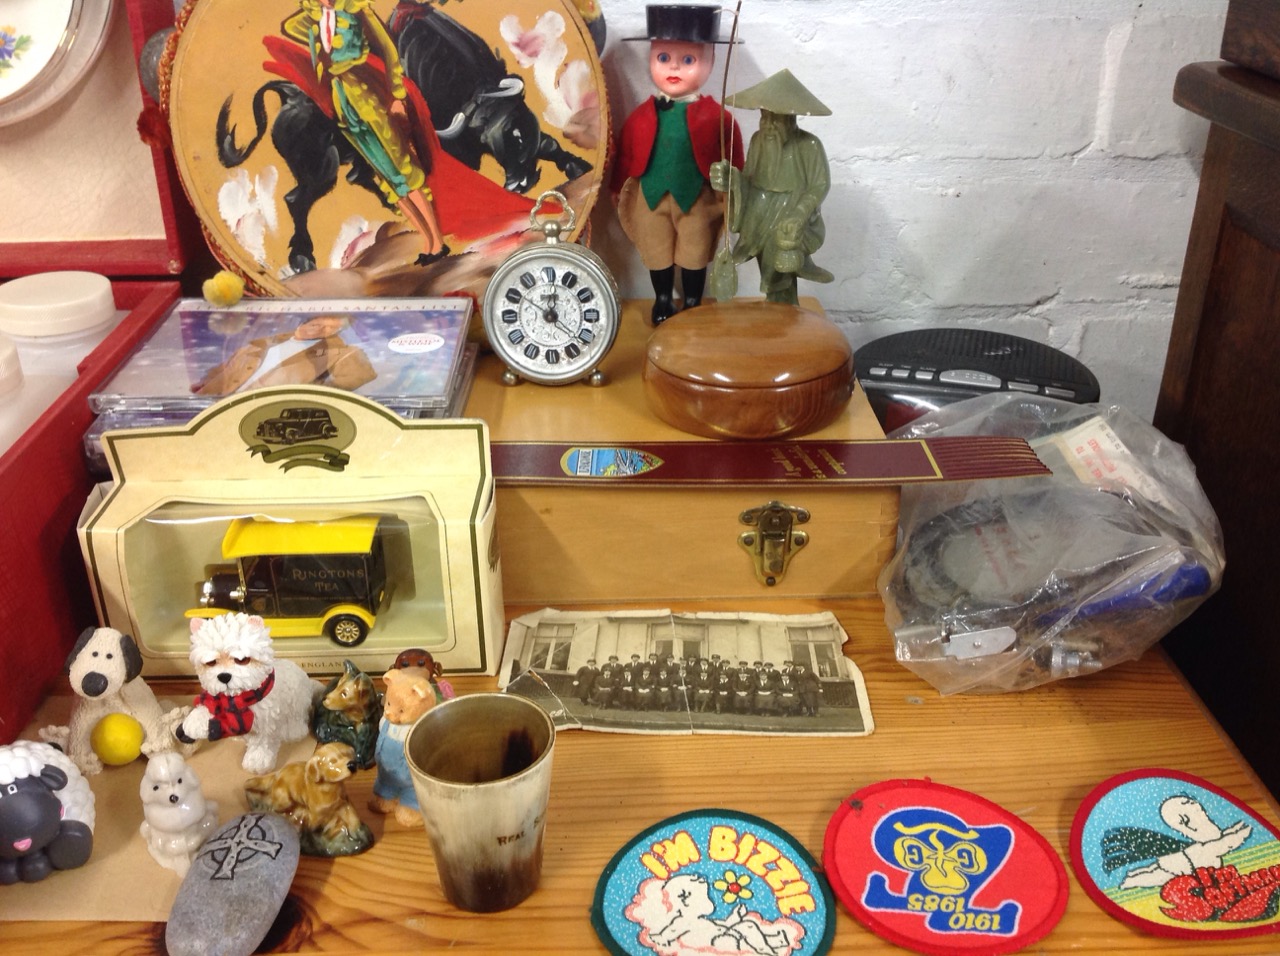 A 60s Brixton cased floral picnic set; and other collectors items including whimsies, a - Image 3 of 3